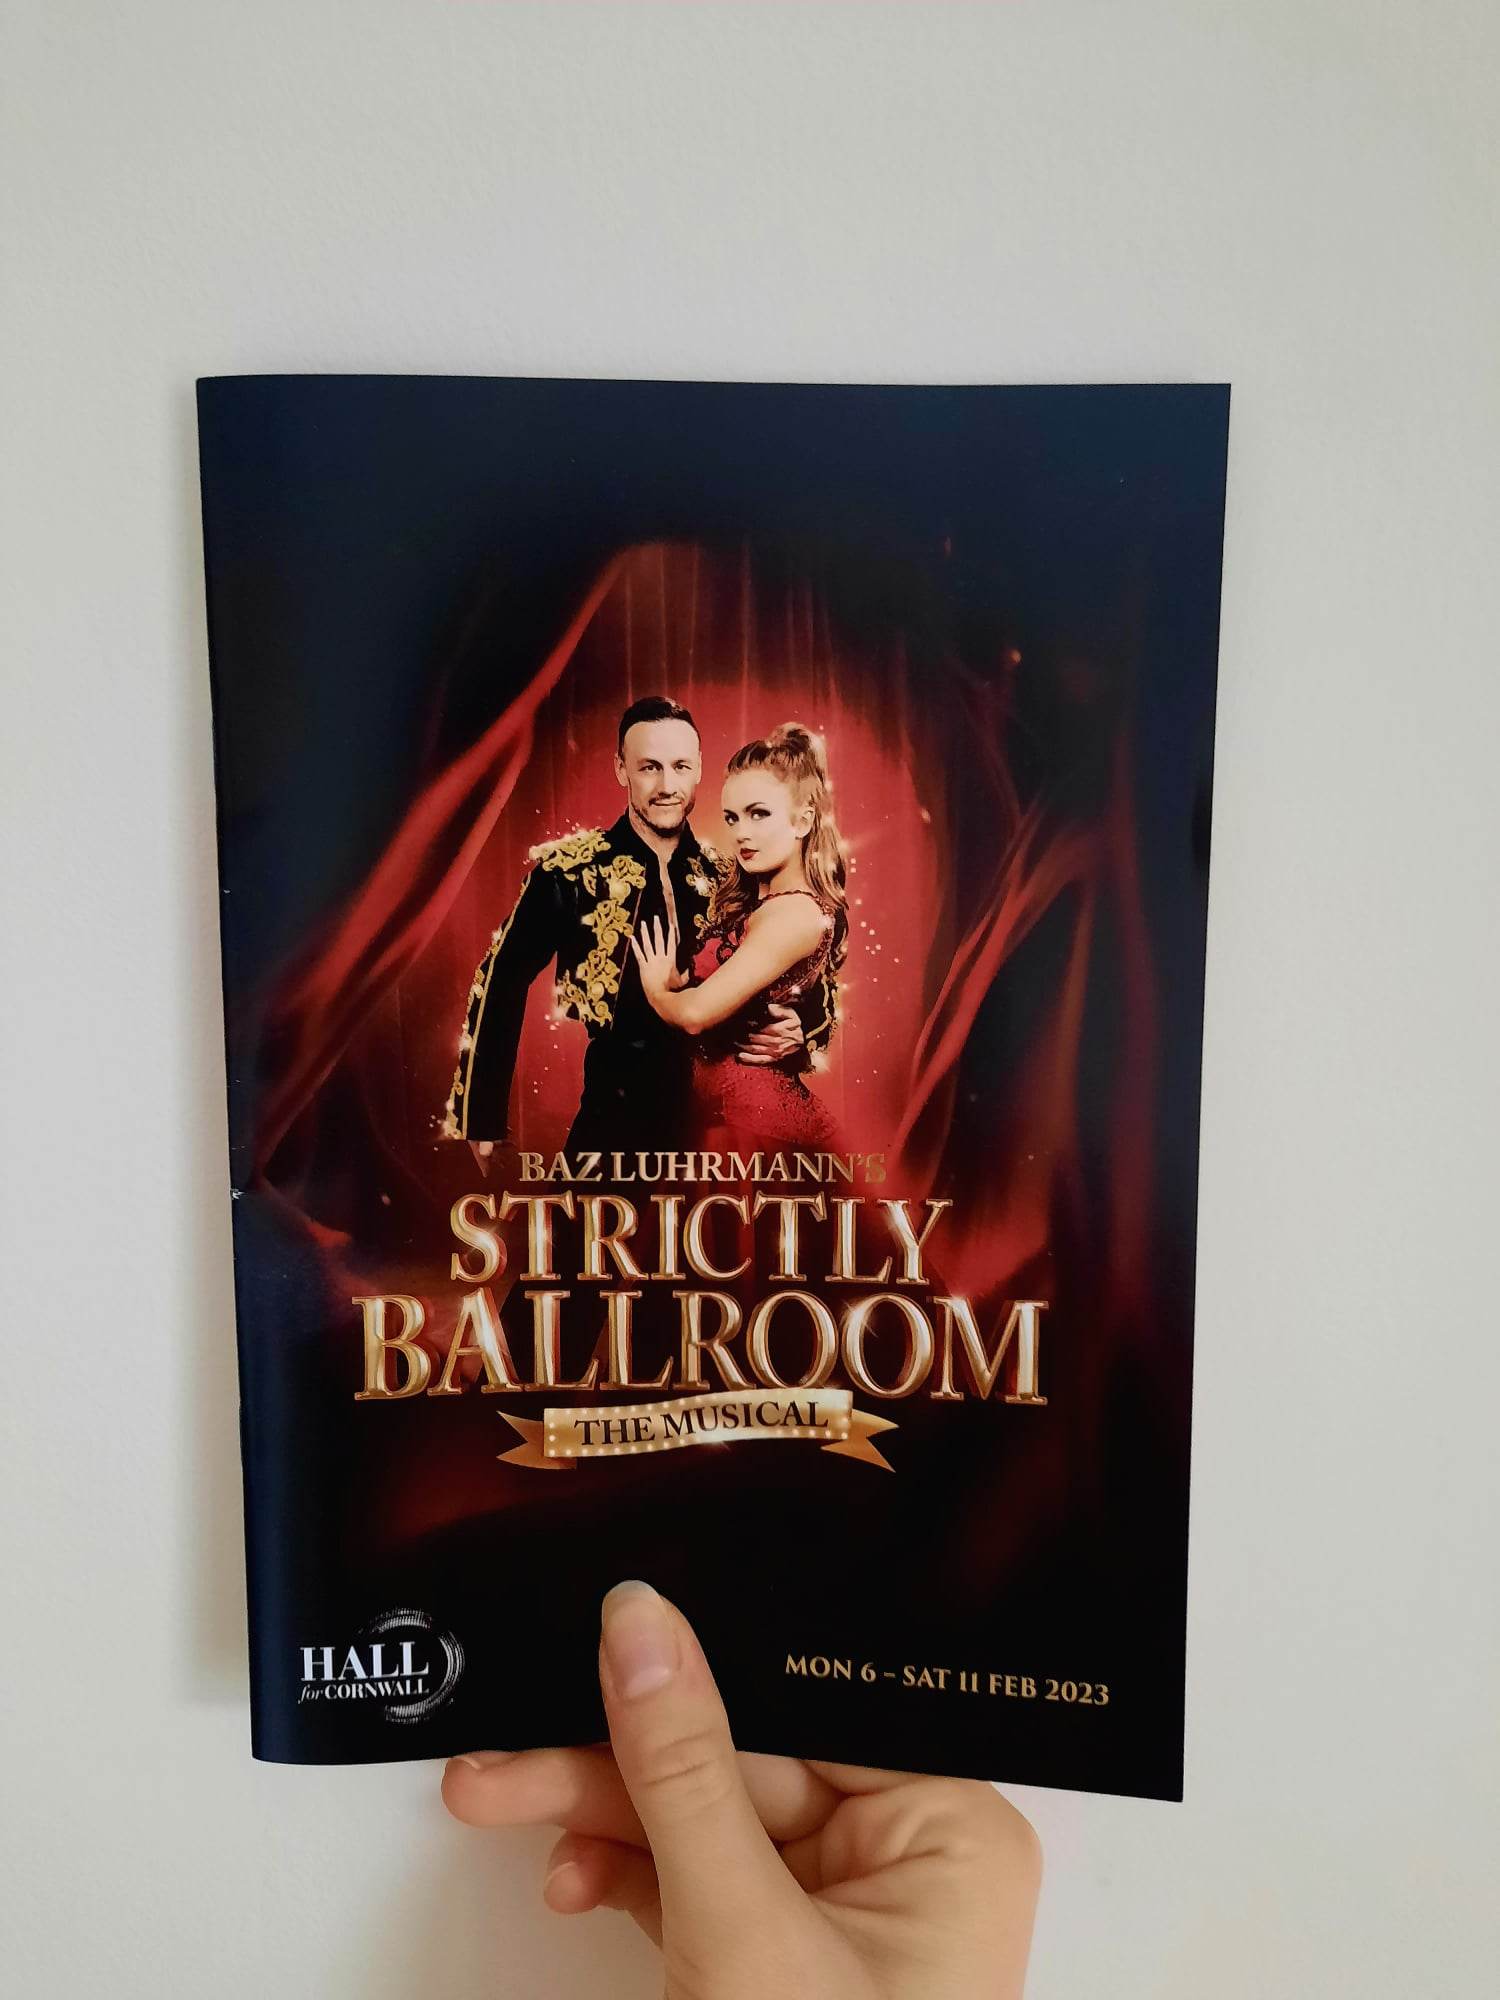 Strictly Ballroom Wows at Hall for Cornwall: Theatre Review